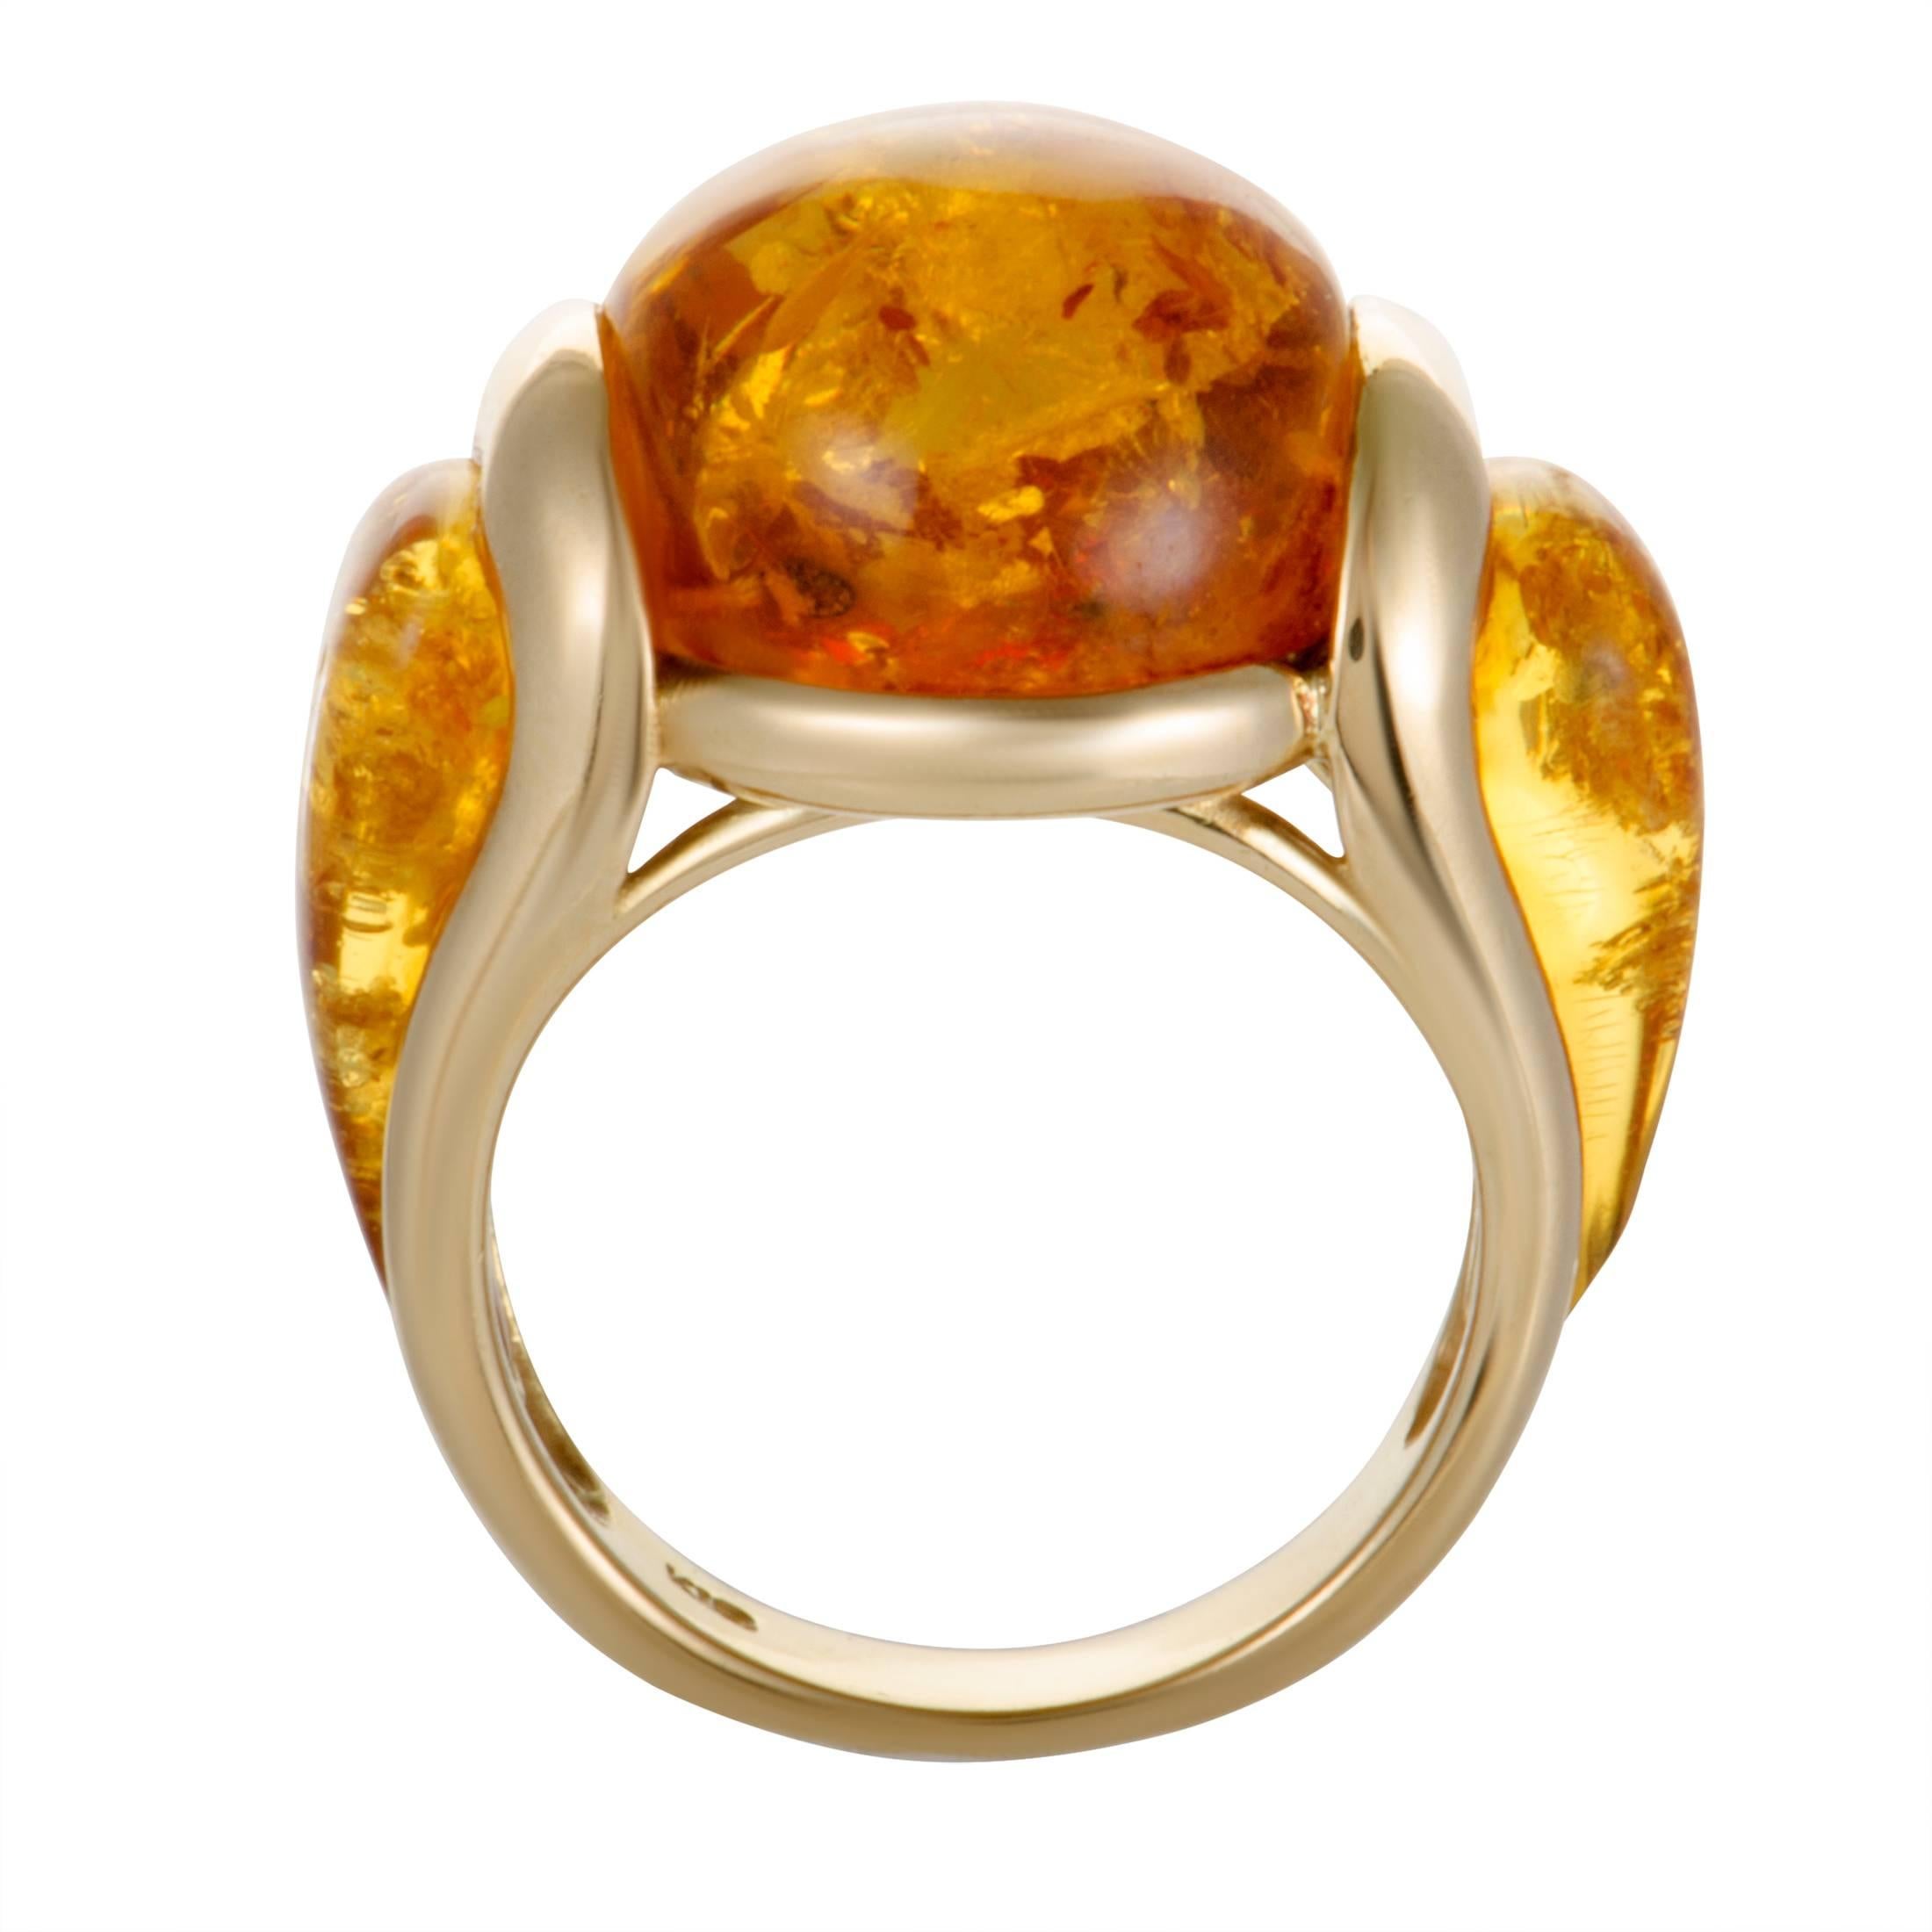 The intriguing amber lends its ever-present allure to this stunning ring that boasts an exceptionally harmonious, yet incredibly eye-catching appearance. The ring is made of radiant 18K yellow gold and weighs 10.5 grams.
Ring Size: 6.25
Ring Top